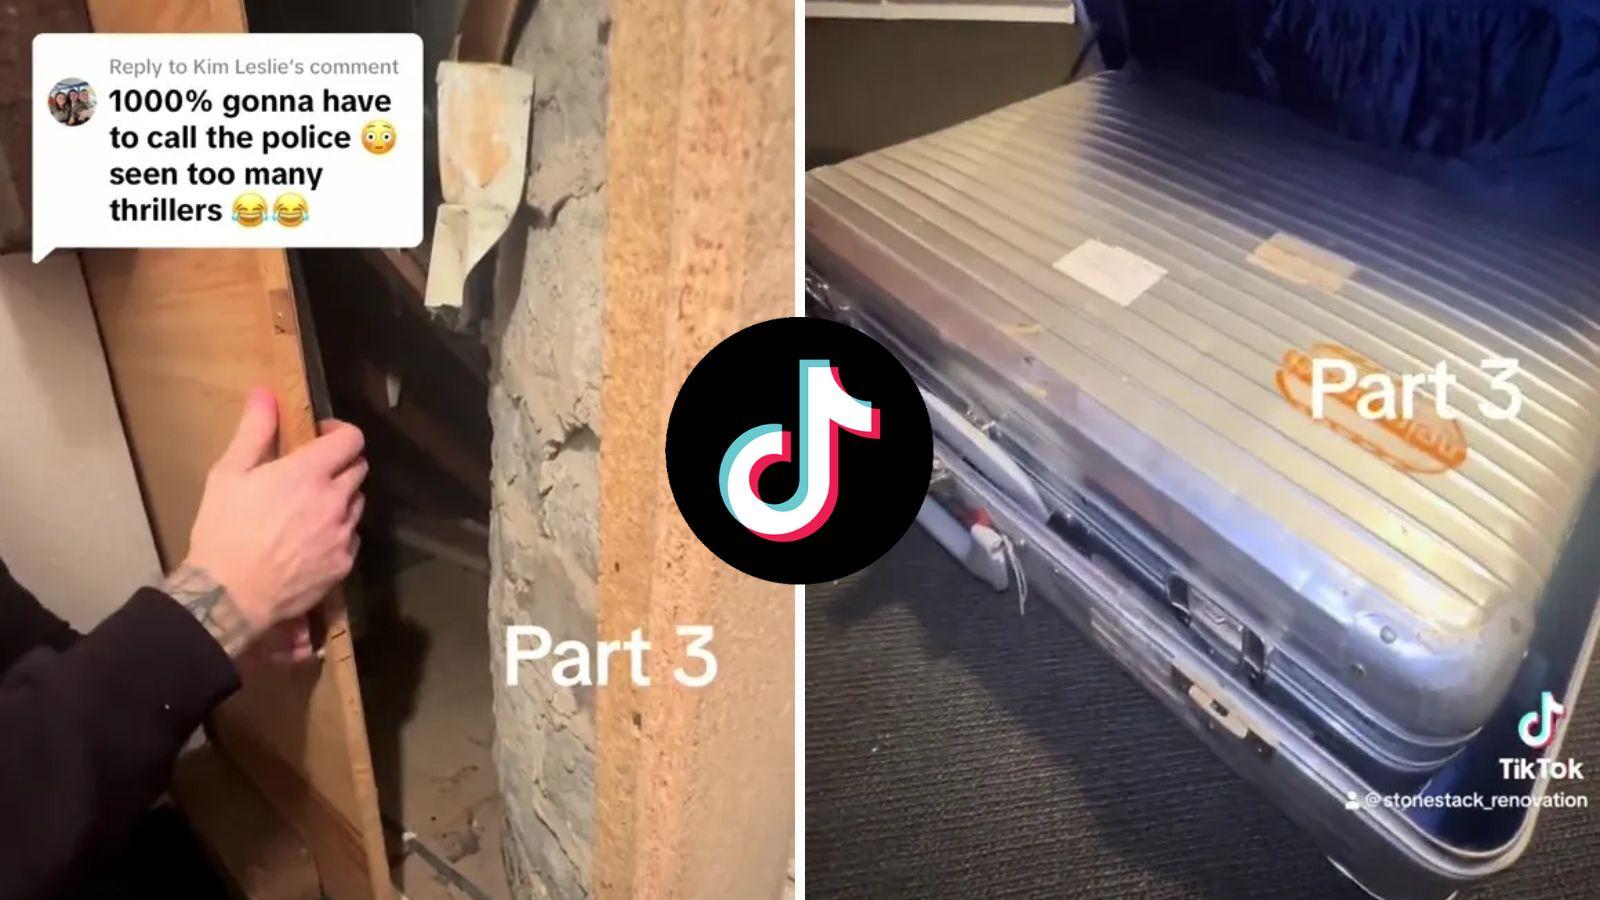 Woman stunned after opening 'creepy' old suitcase hidden in walls